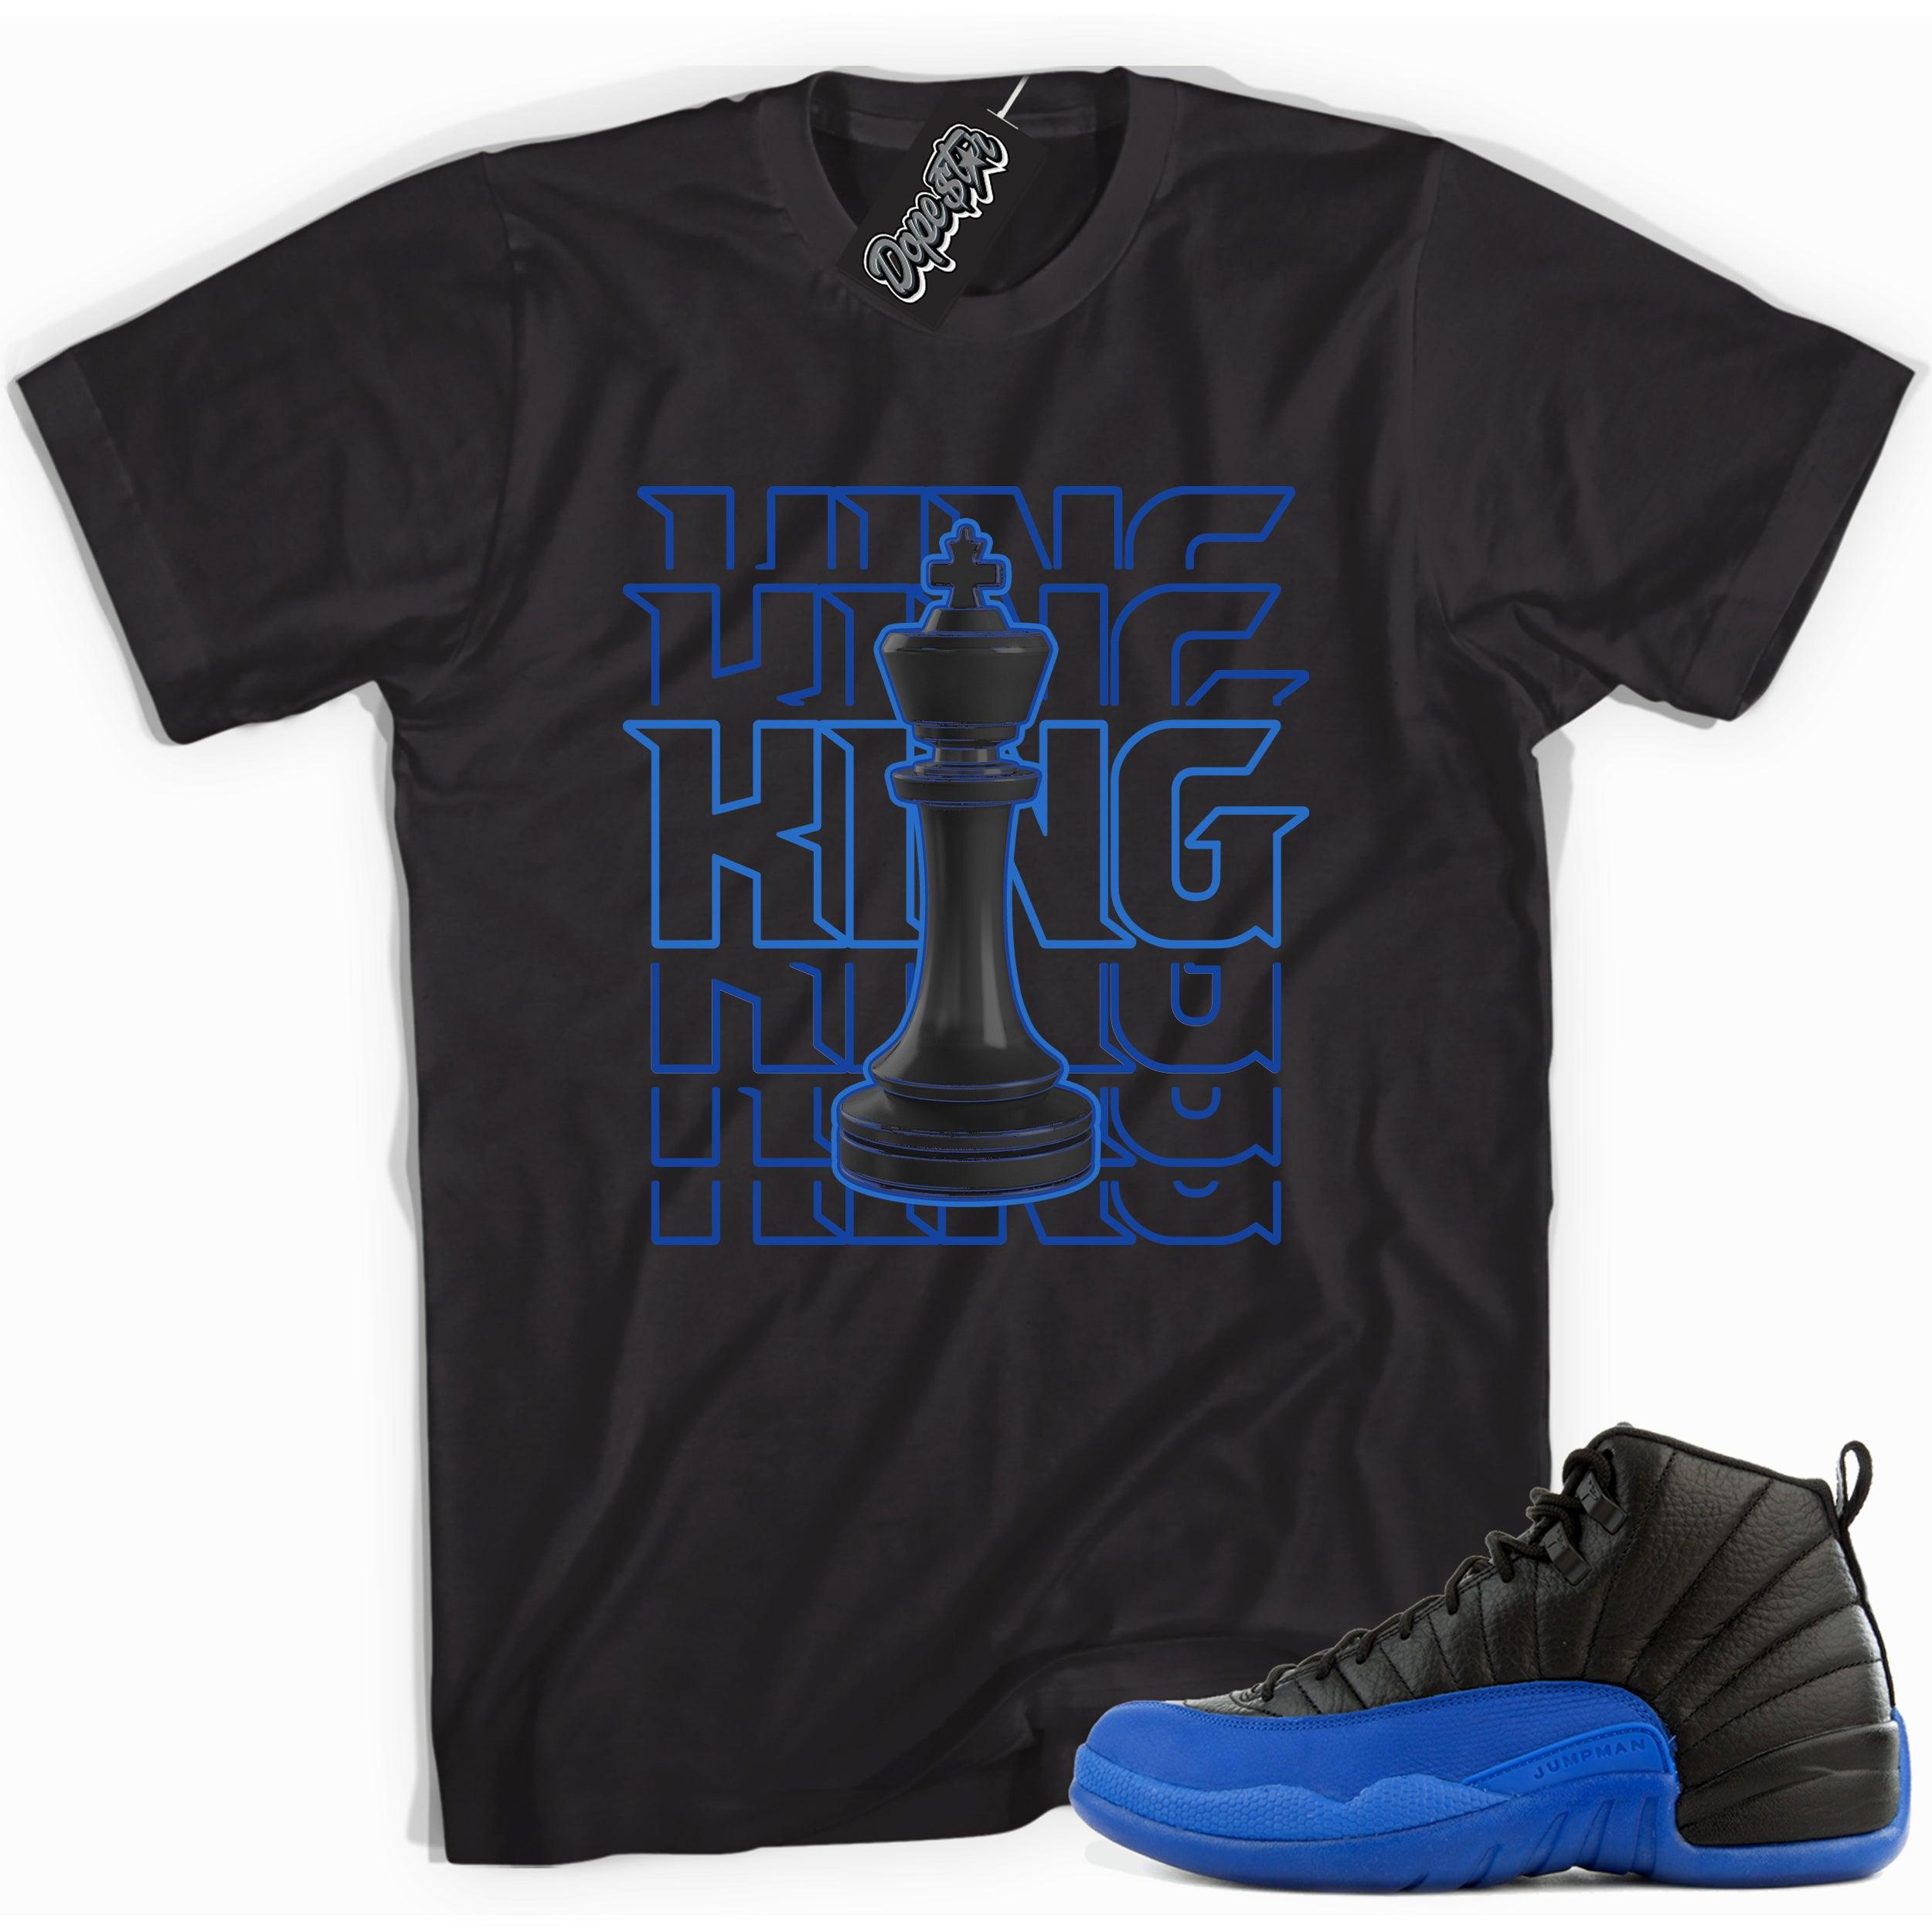 Cool black graphic tee with 'king' print, that perfectly matches  Air Jordan 12 Retro Black Game Royal sneakers.